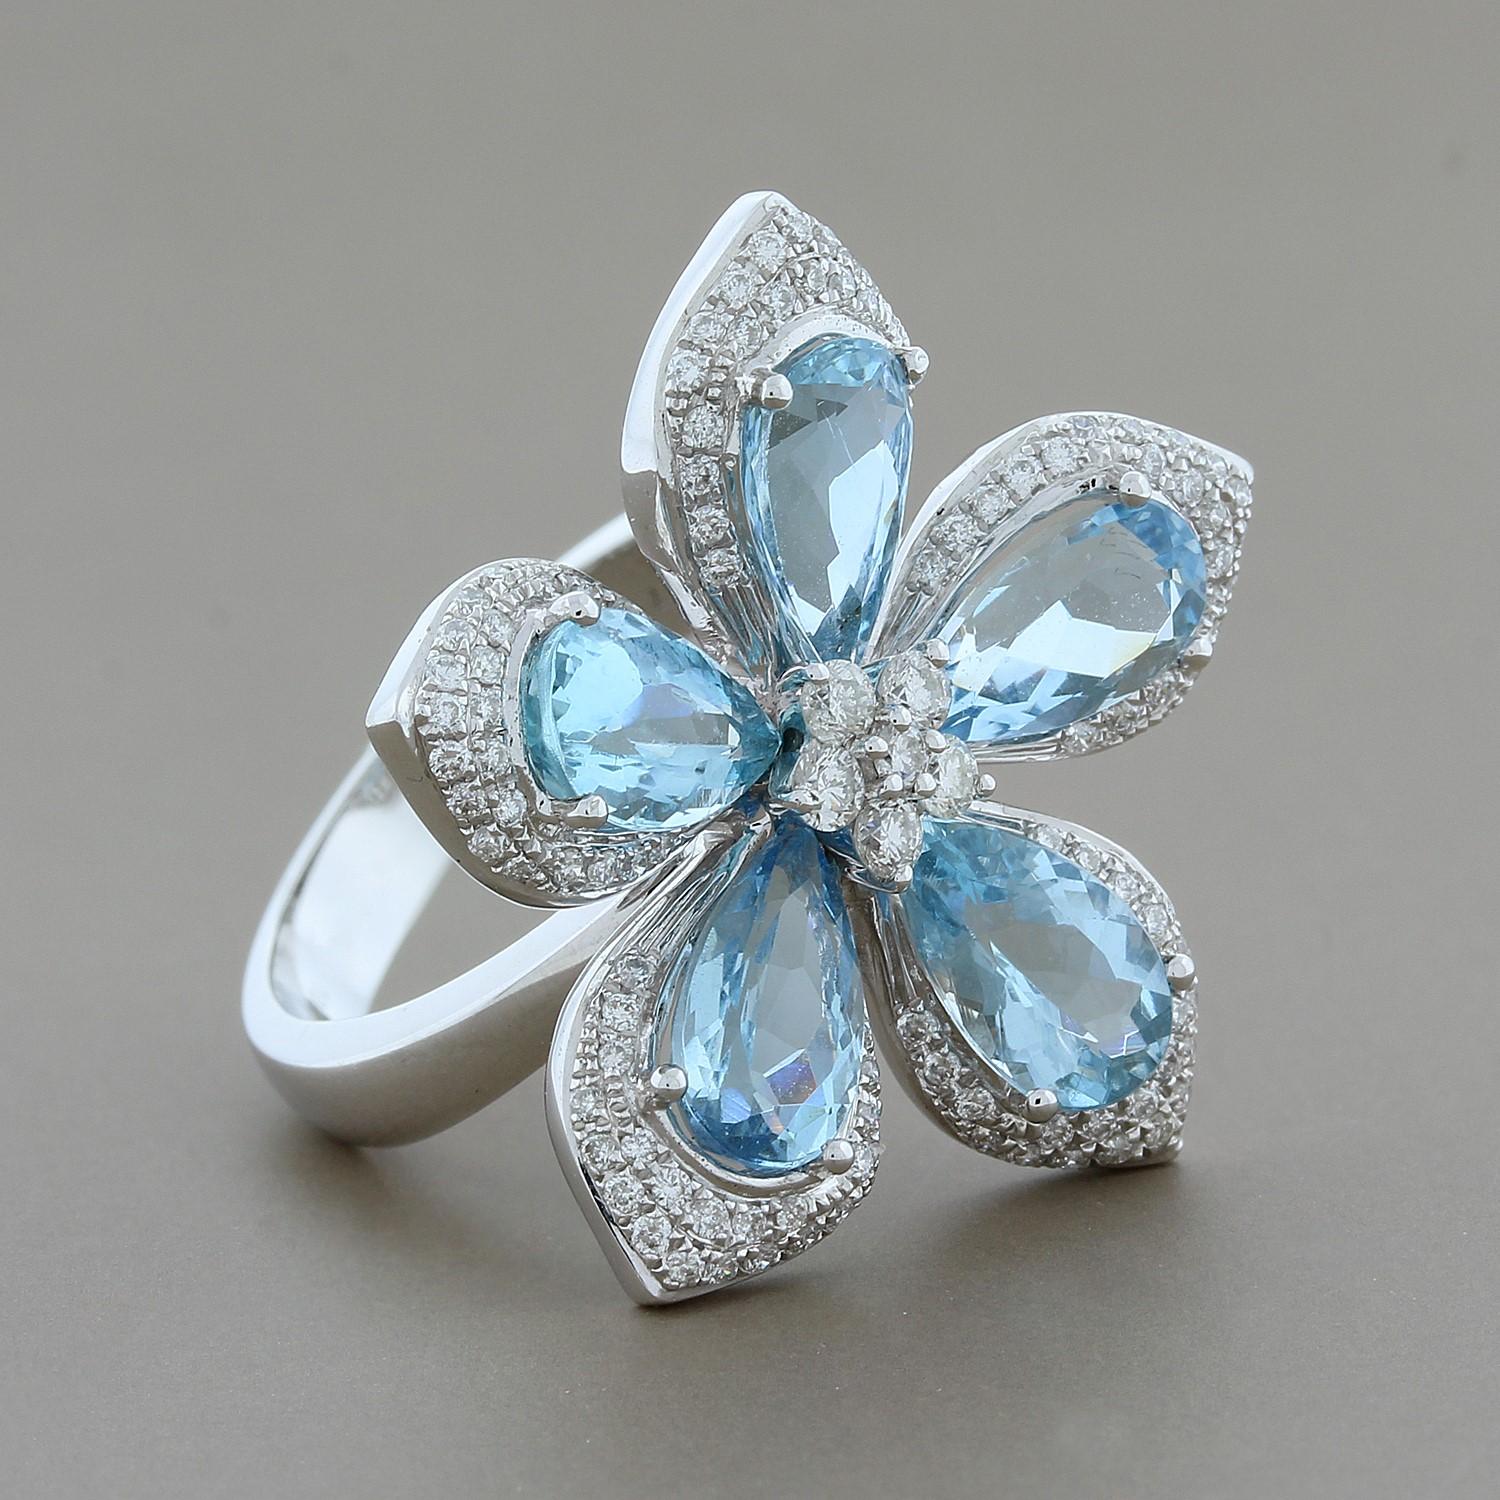 A feminine five petal flower comprised of 4.28 carats of pear shape aquamarines.  The aquamarines are all perfectly matching in blue color. Round cut diamonds sit in the center of the ring to create the flower bud and pave diamonds halo each pear